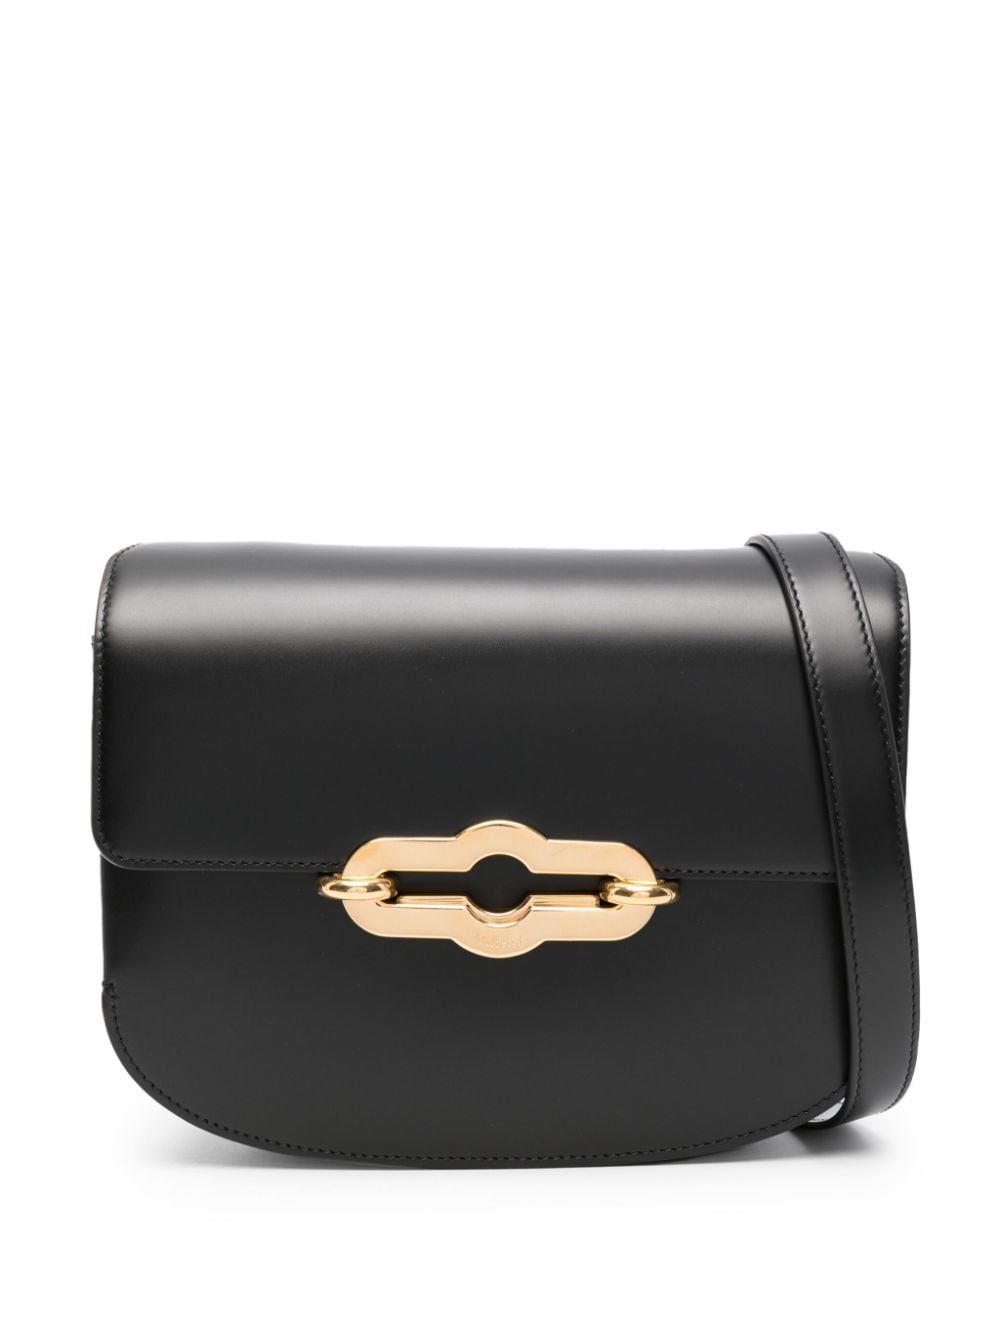 Image 1 of Mulberry Pimlico leather satchel bag